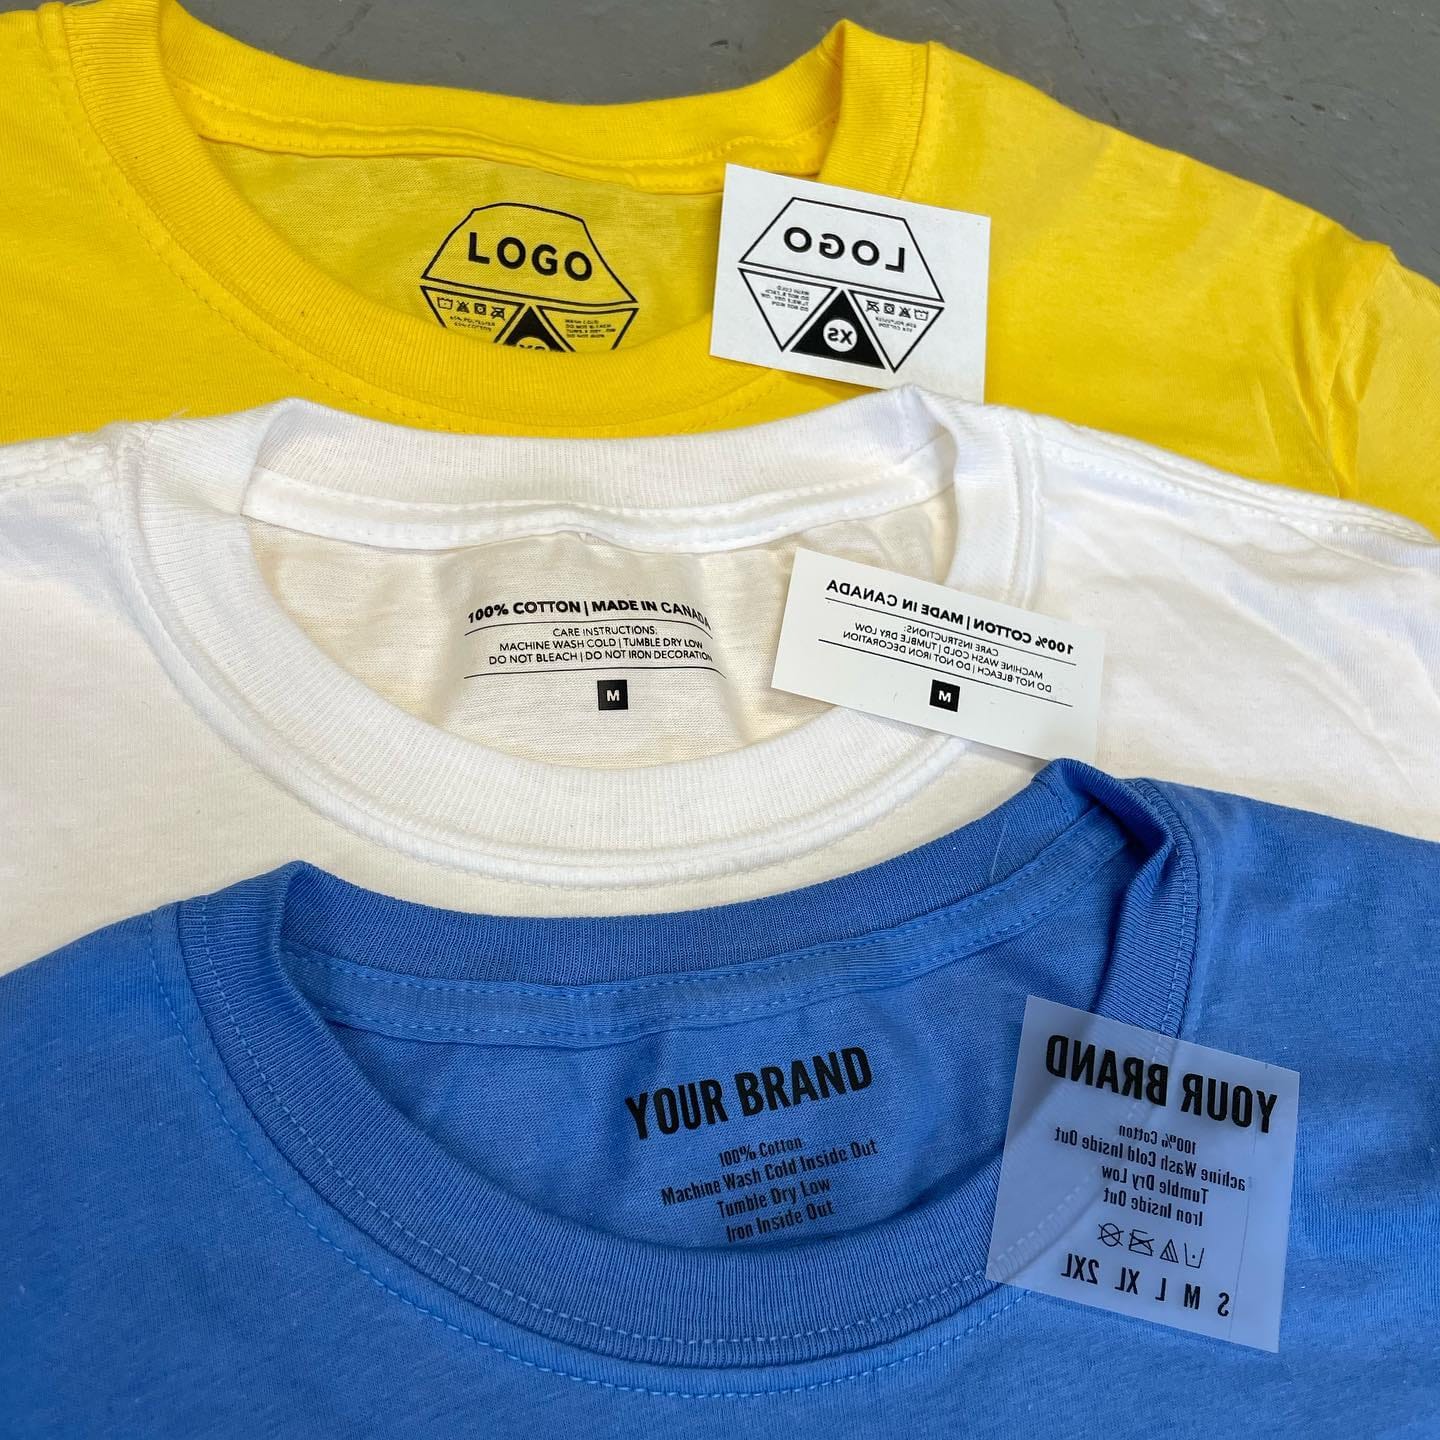 Our top 3 screen printed heat labels for your garments. 20% OFF on all labels until Friday.  Simply apply them with a heat press. 

Starting from the top : Hot peel label, Cold peel label and Eco PET Film label.

Highest transfer durability. Our transfer formula has been developped and improved through the years. 🇨🇦

Stretch tests and wash tests coming!
.
.
#heatlabels #screenprinted #screenprinting #roq #m&r #vastex #plastisoltransfers #heattransfers #customprinting #printing #tshirt #branding #screenprinttransfers #tonatelier #canadian